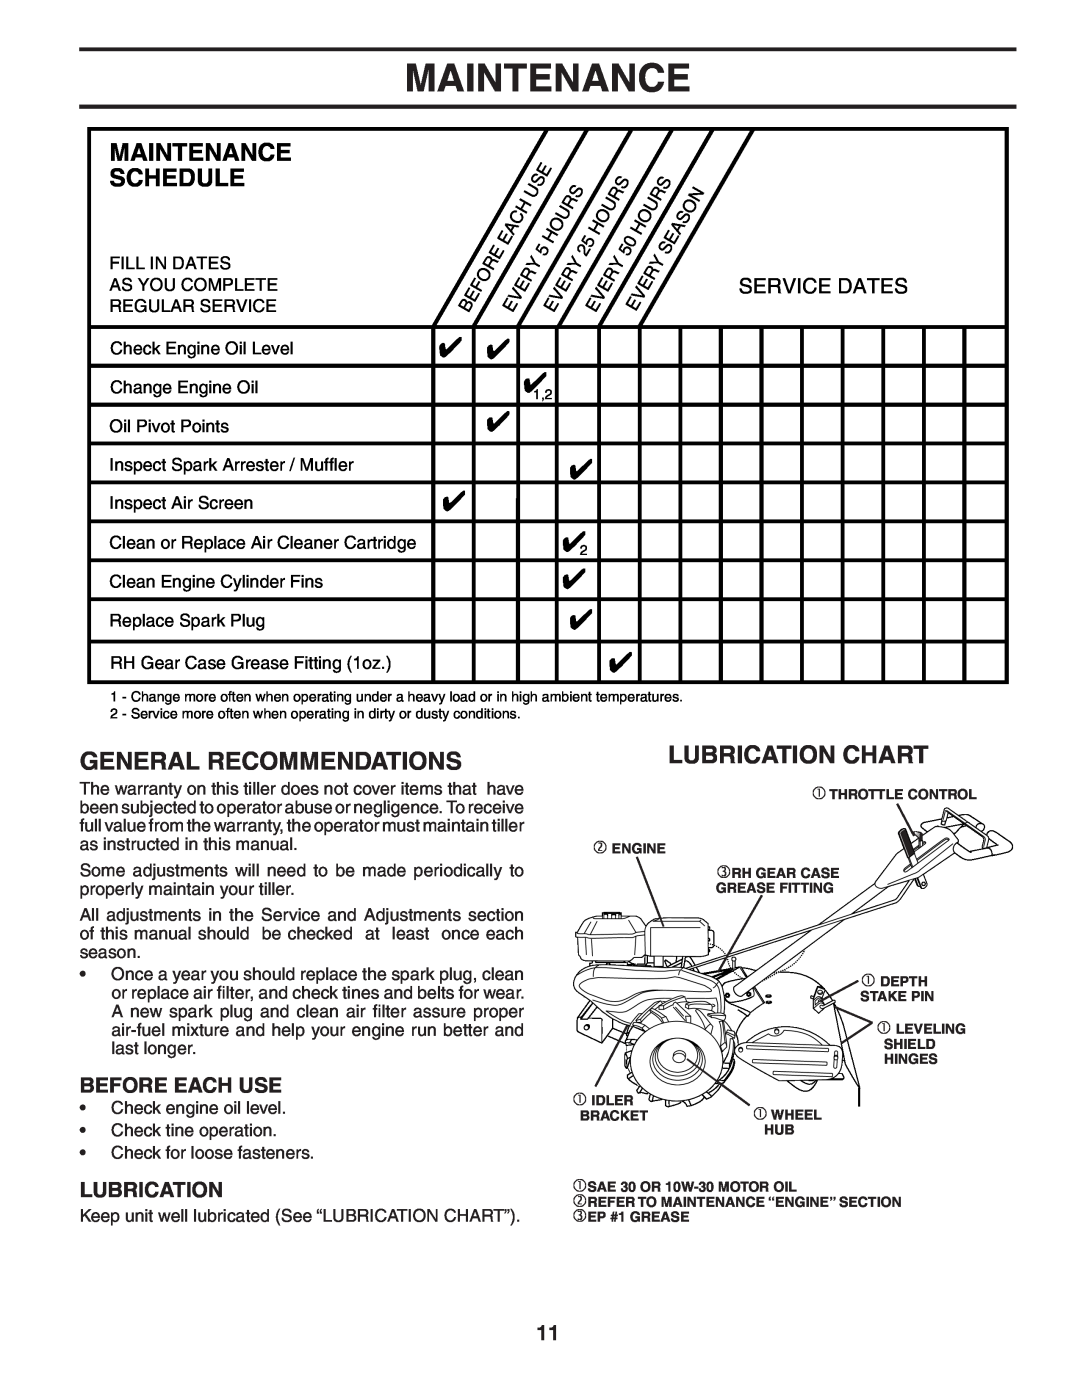 Poulan 96092001200 Maintenance, Schedule, General Recommendations, Lubrication Chart, Before Each Use, Service Dates 